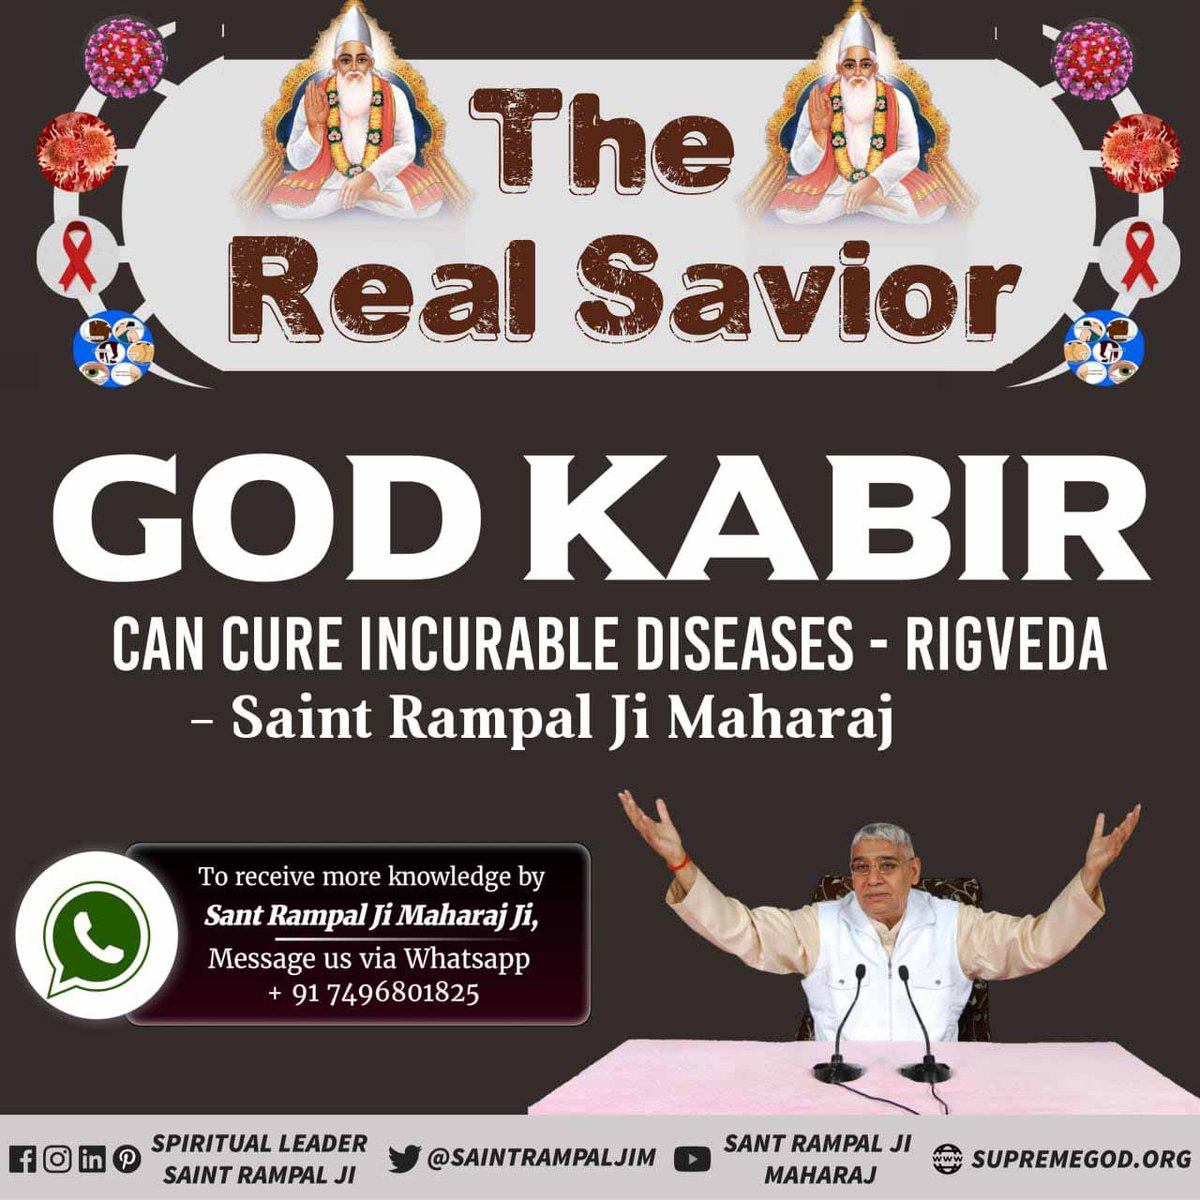 #अविनाशी_परमात्मा_कबीर Complete God KavirDev (Supreme God Kabir), even prior to the knowledge of the Vedas, was present in Satlok, and has also Himself appeared in all the four yugas to impart His real knowledge. Sant Rampal Ji Maharaj